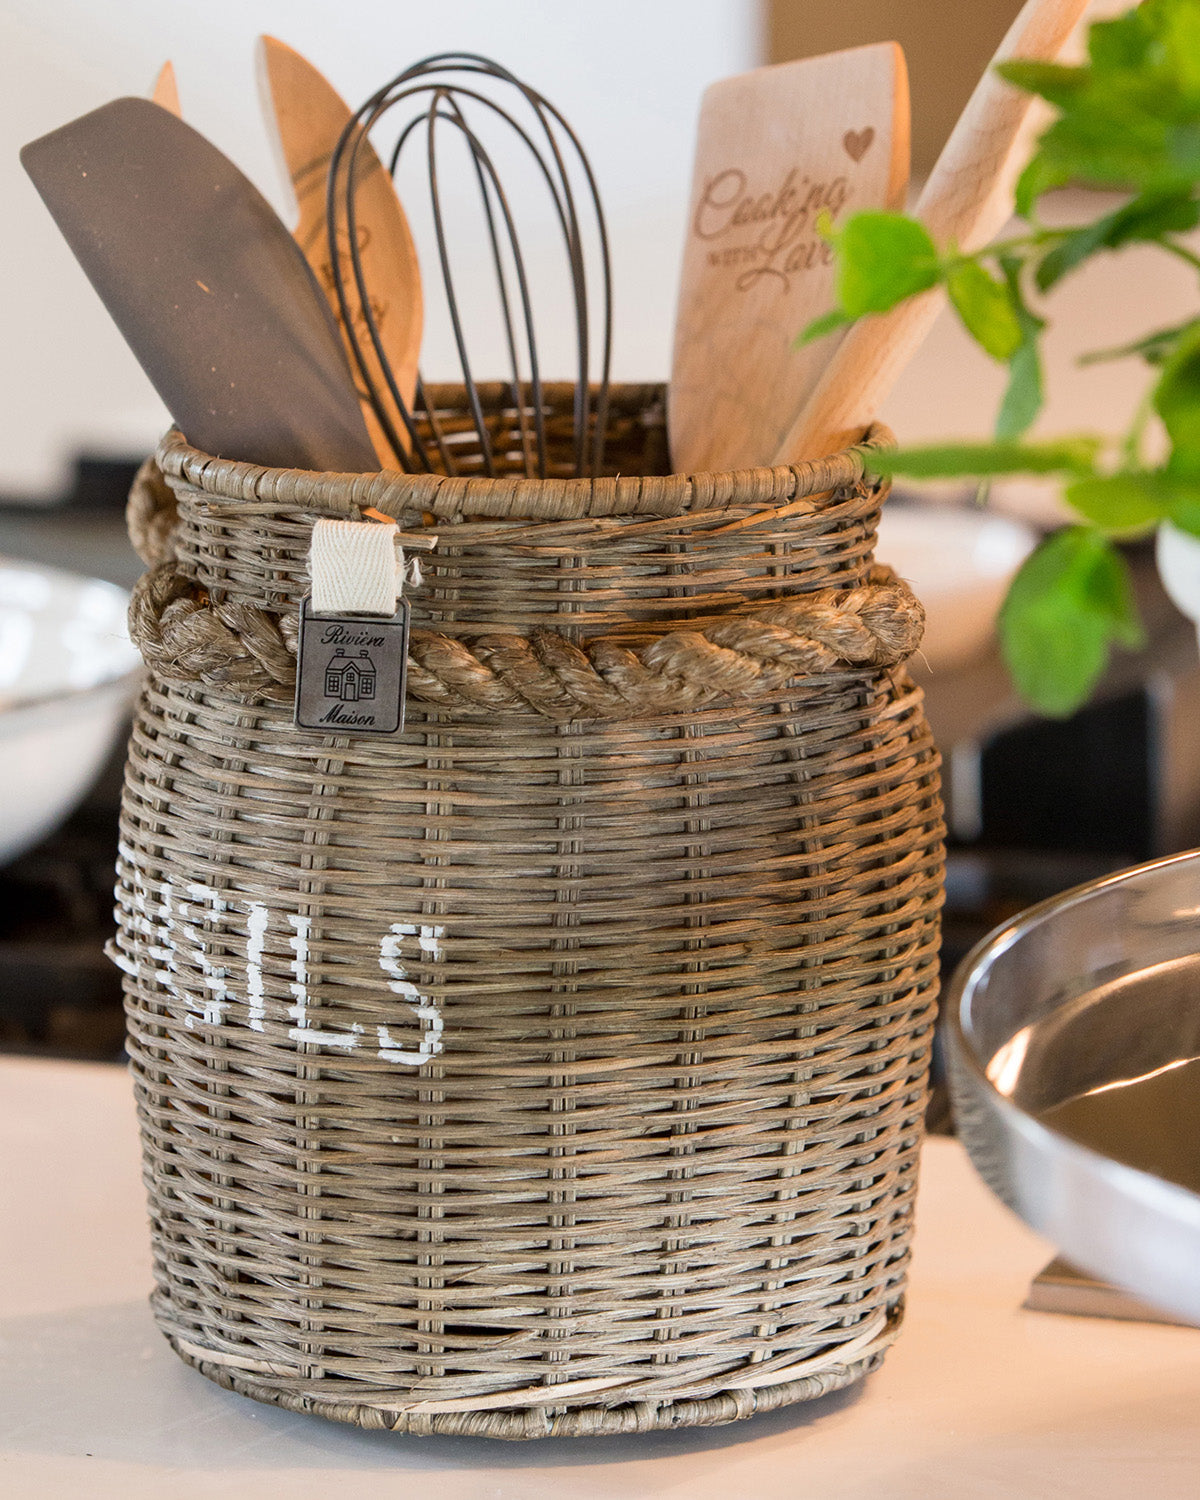 UTENSILS POT made from rattan decorated with kitchen utensils by Riviera Maison